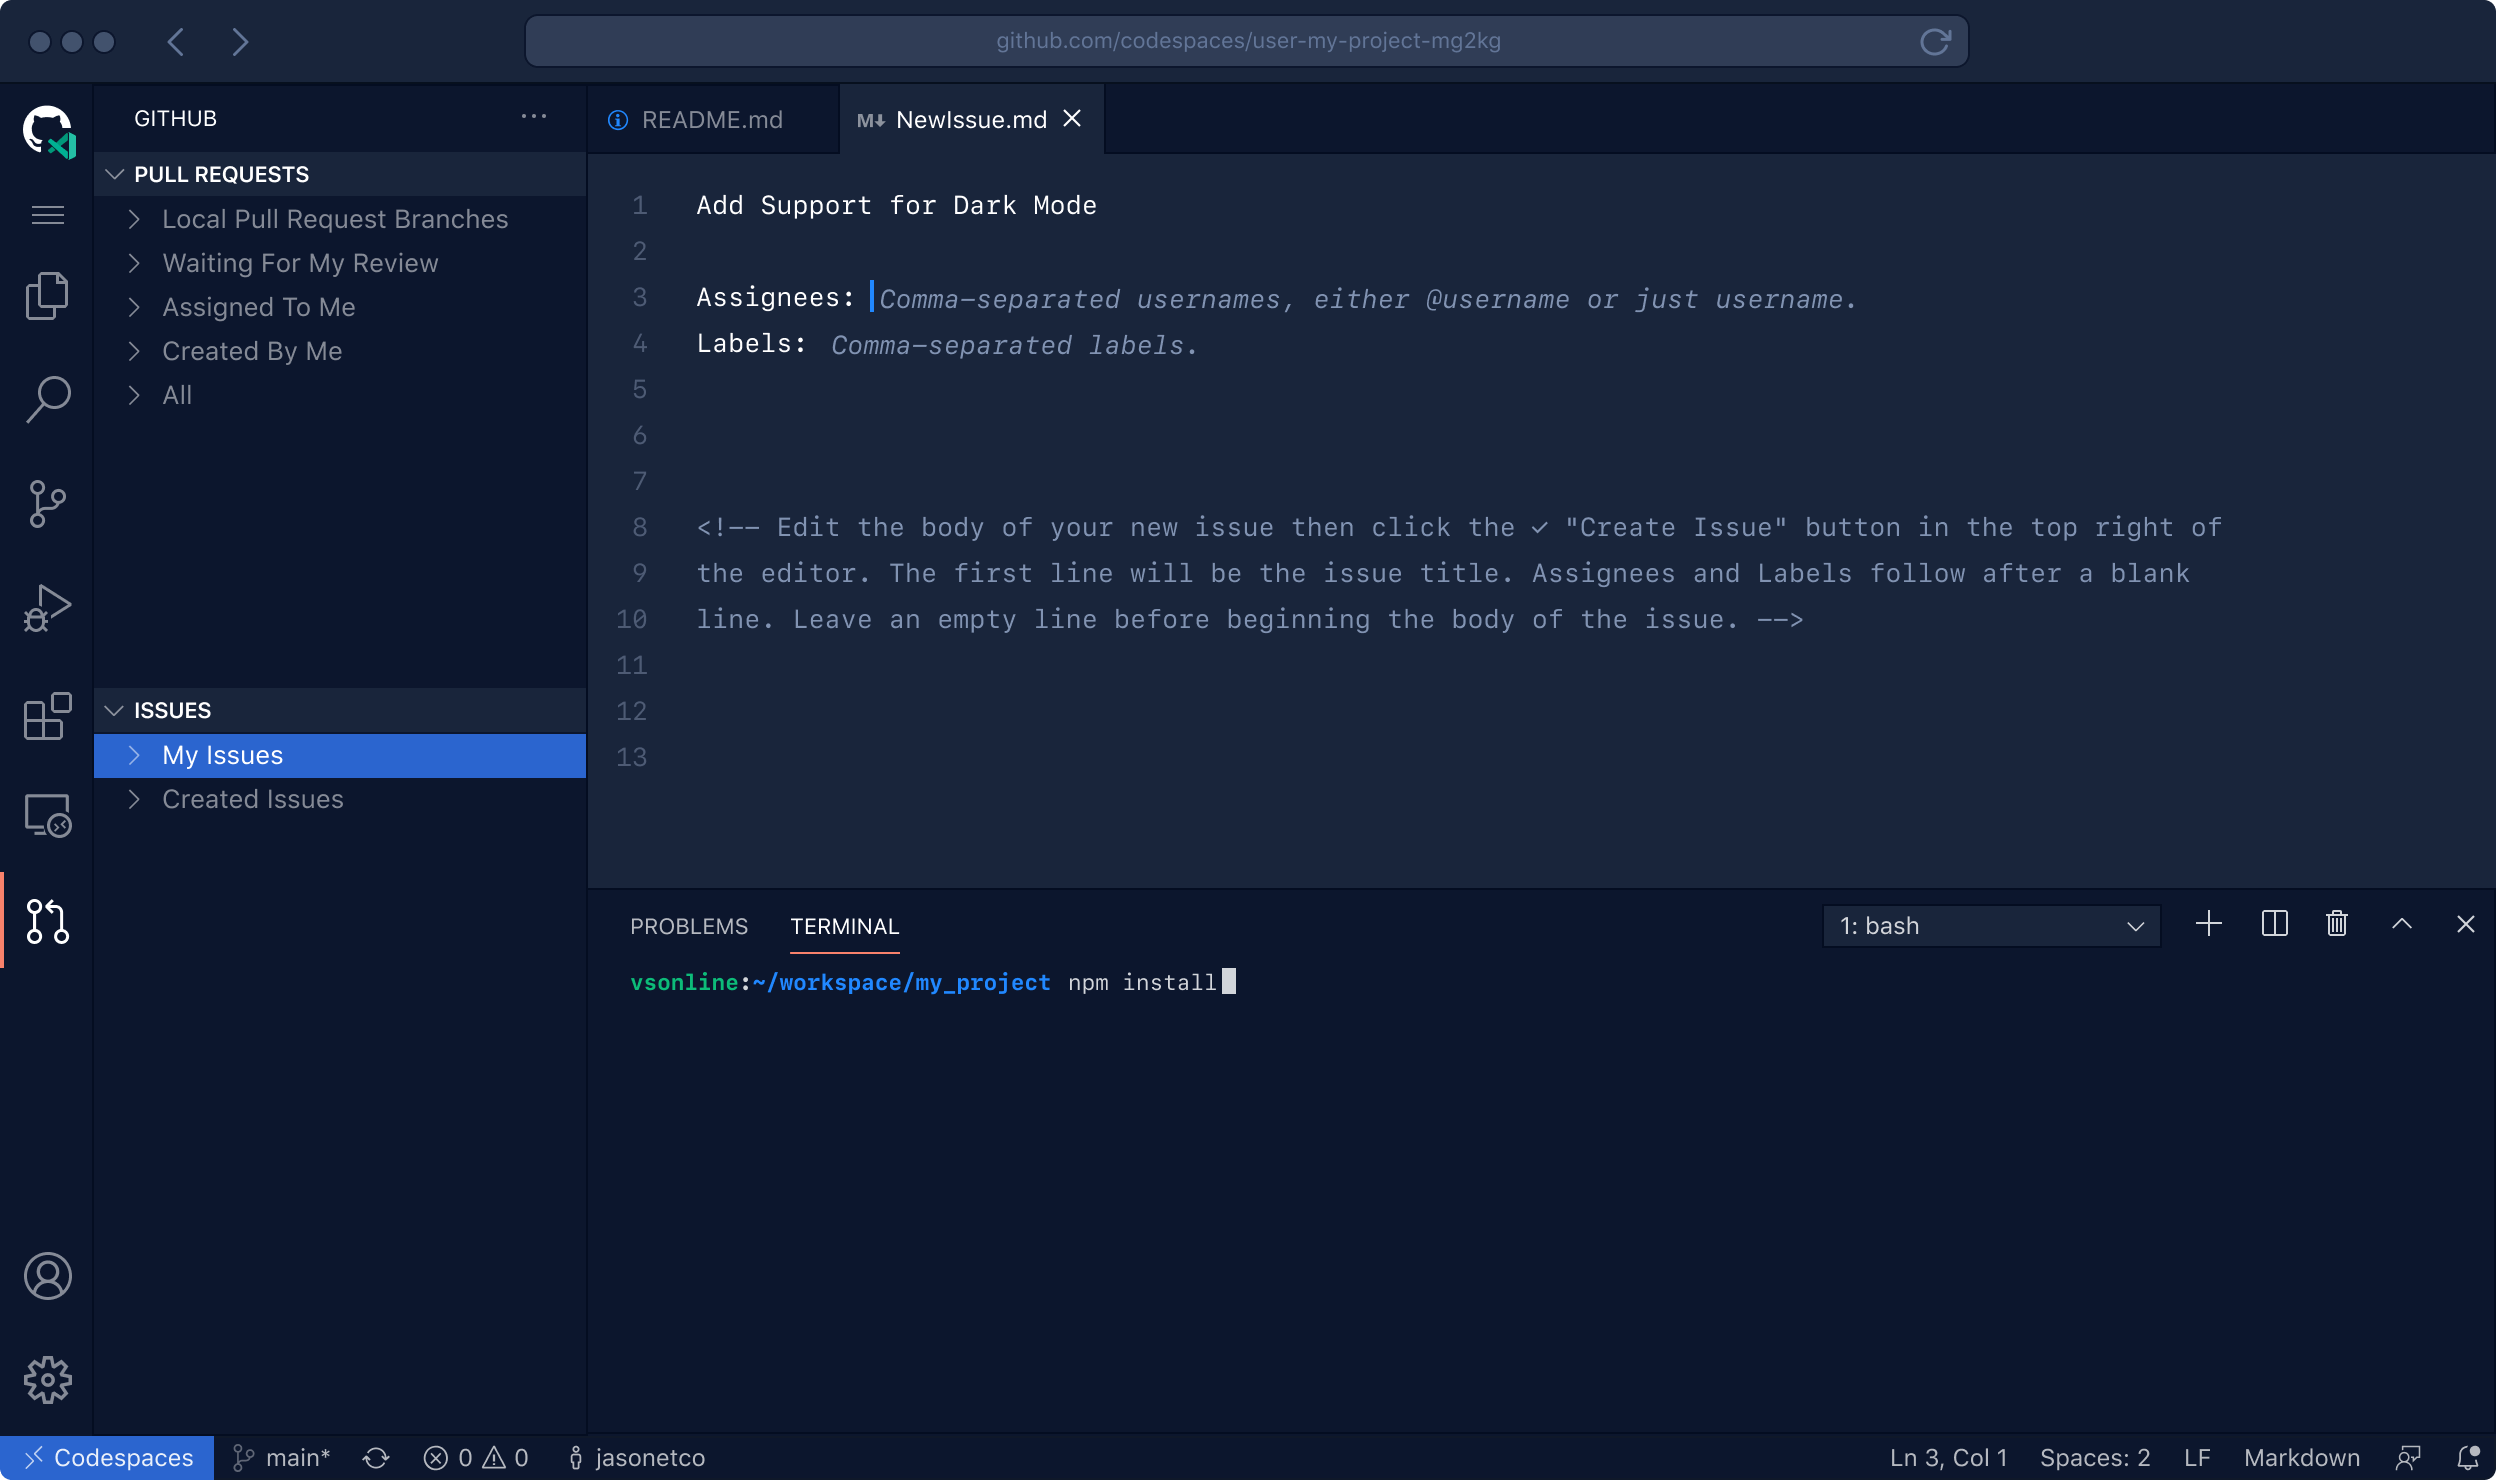 VS Code running in the browser with your project's code and development environment running. A terminal panel is visiable in the editor.